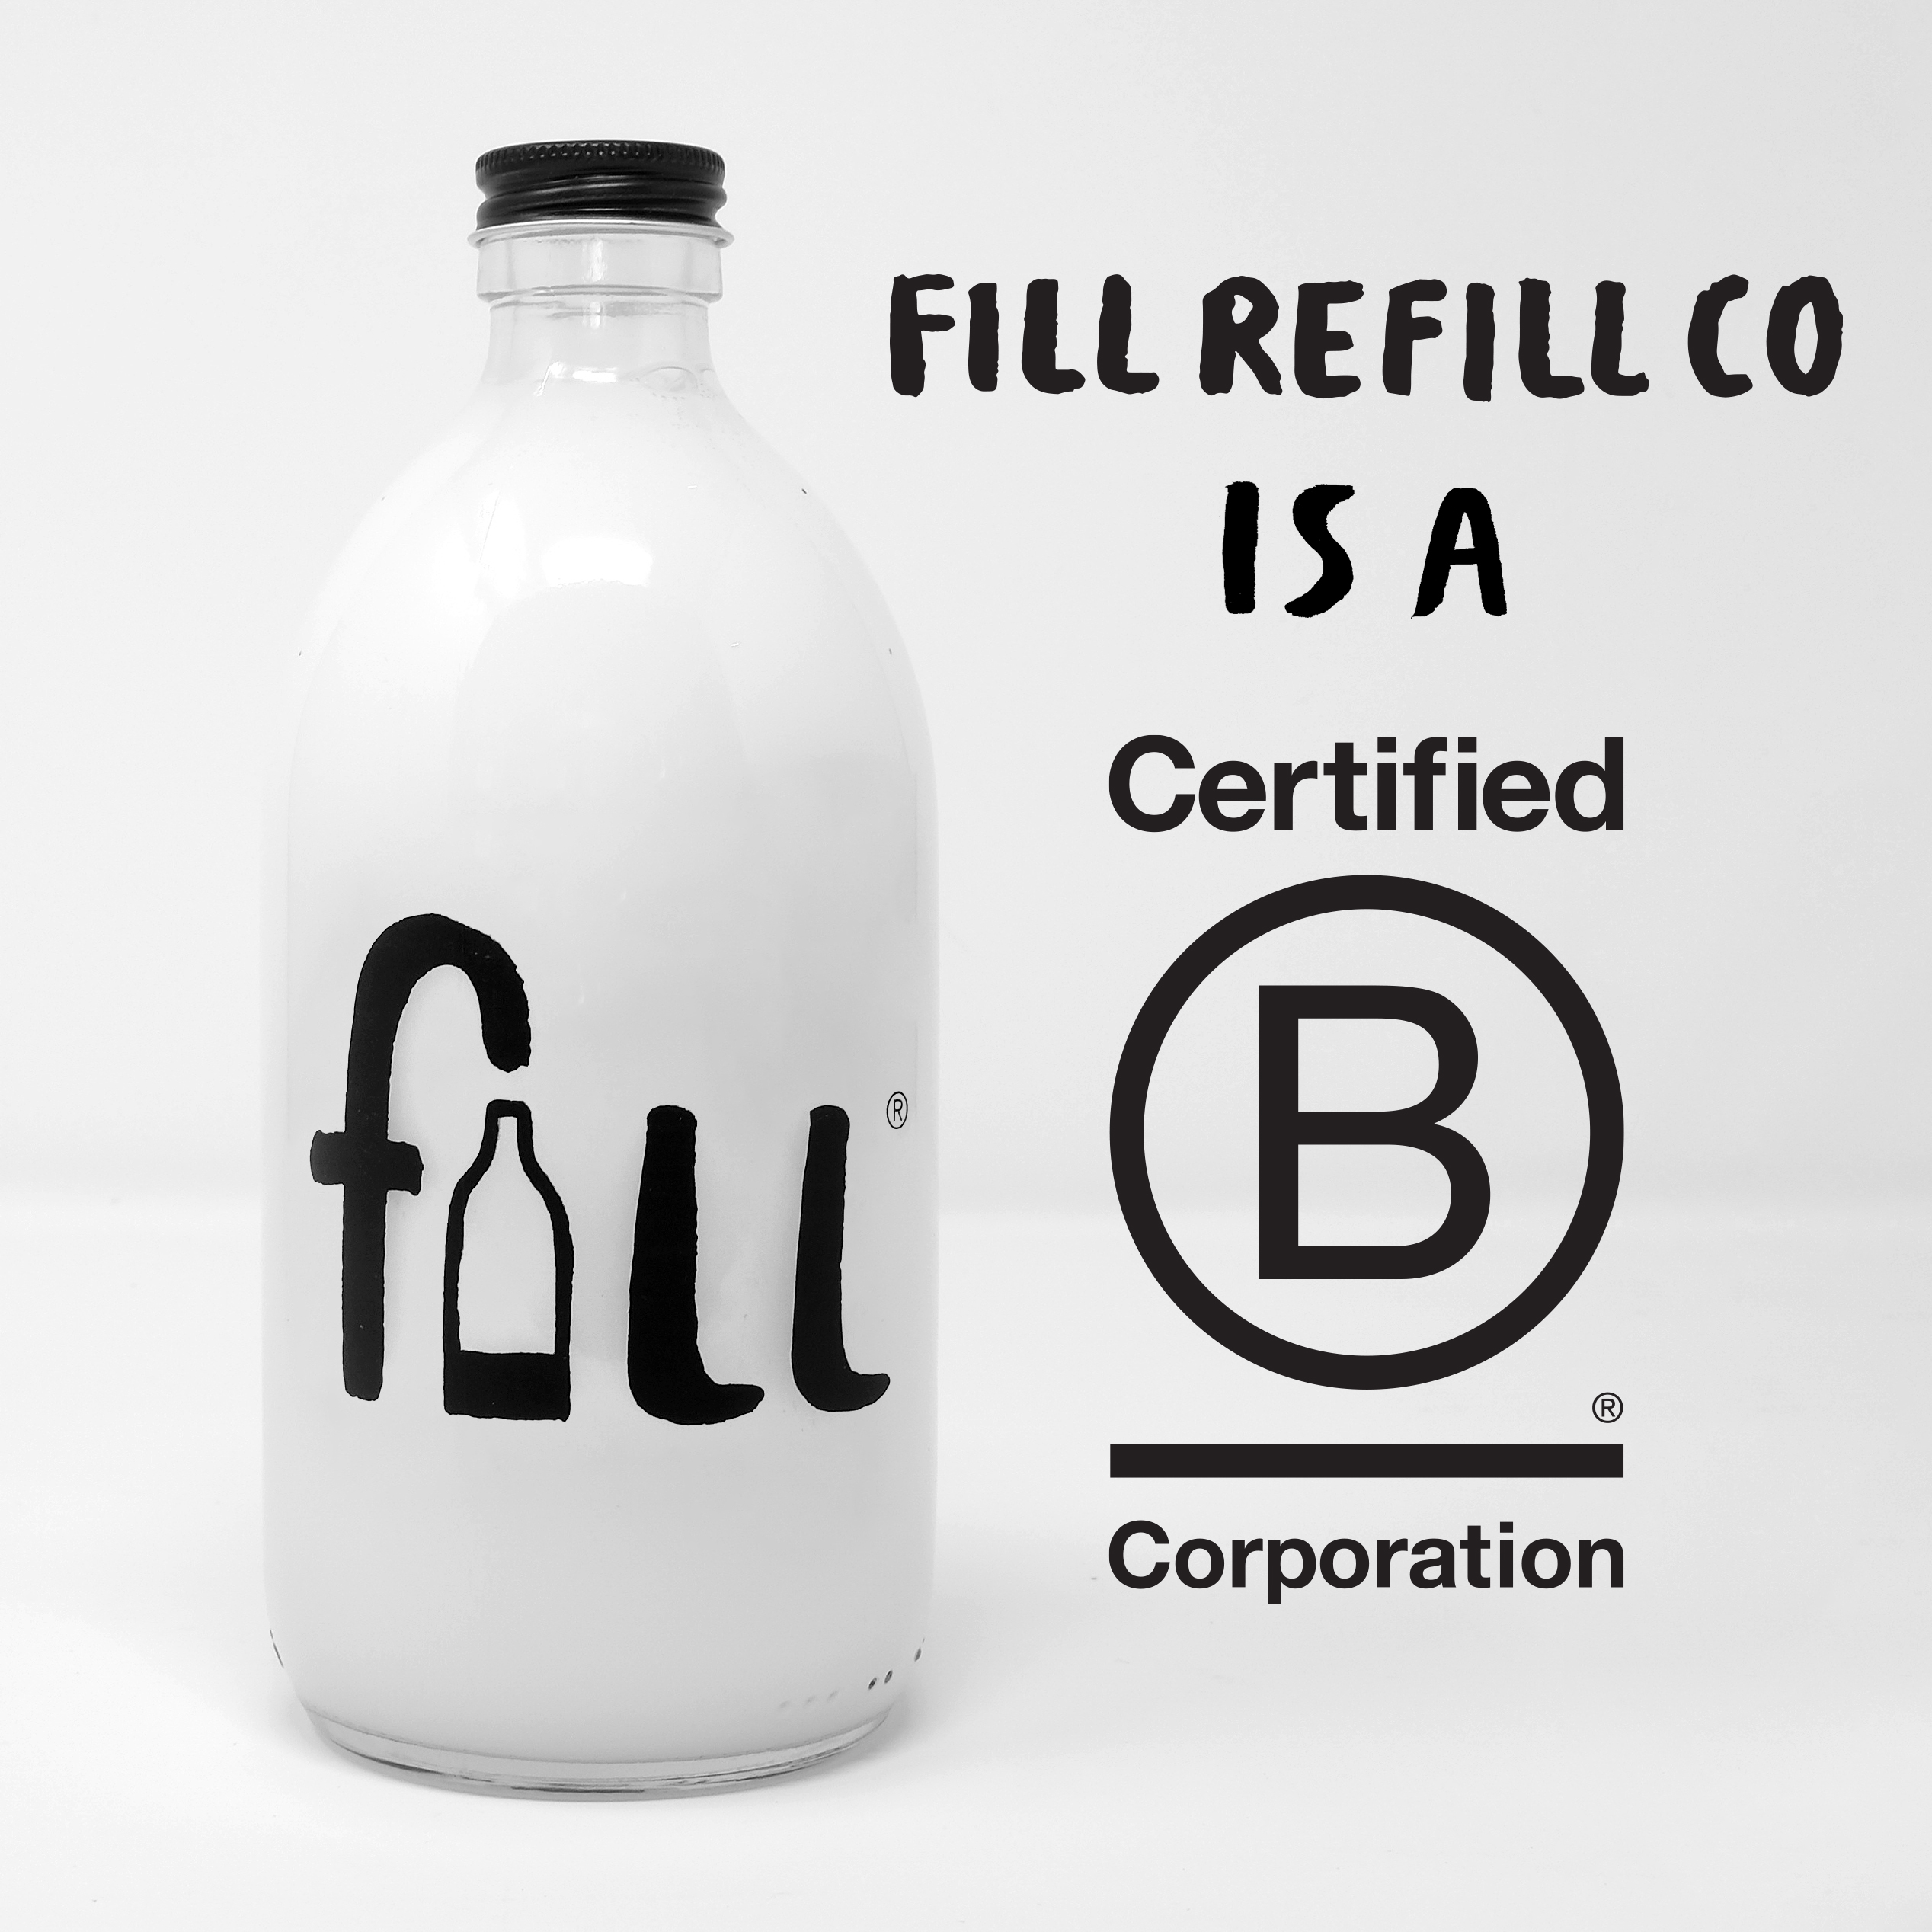 Fill refill is a certified b corporation